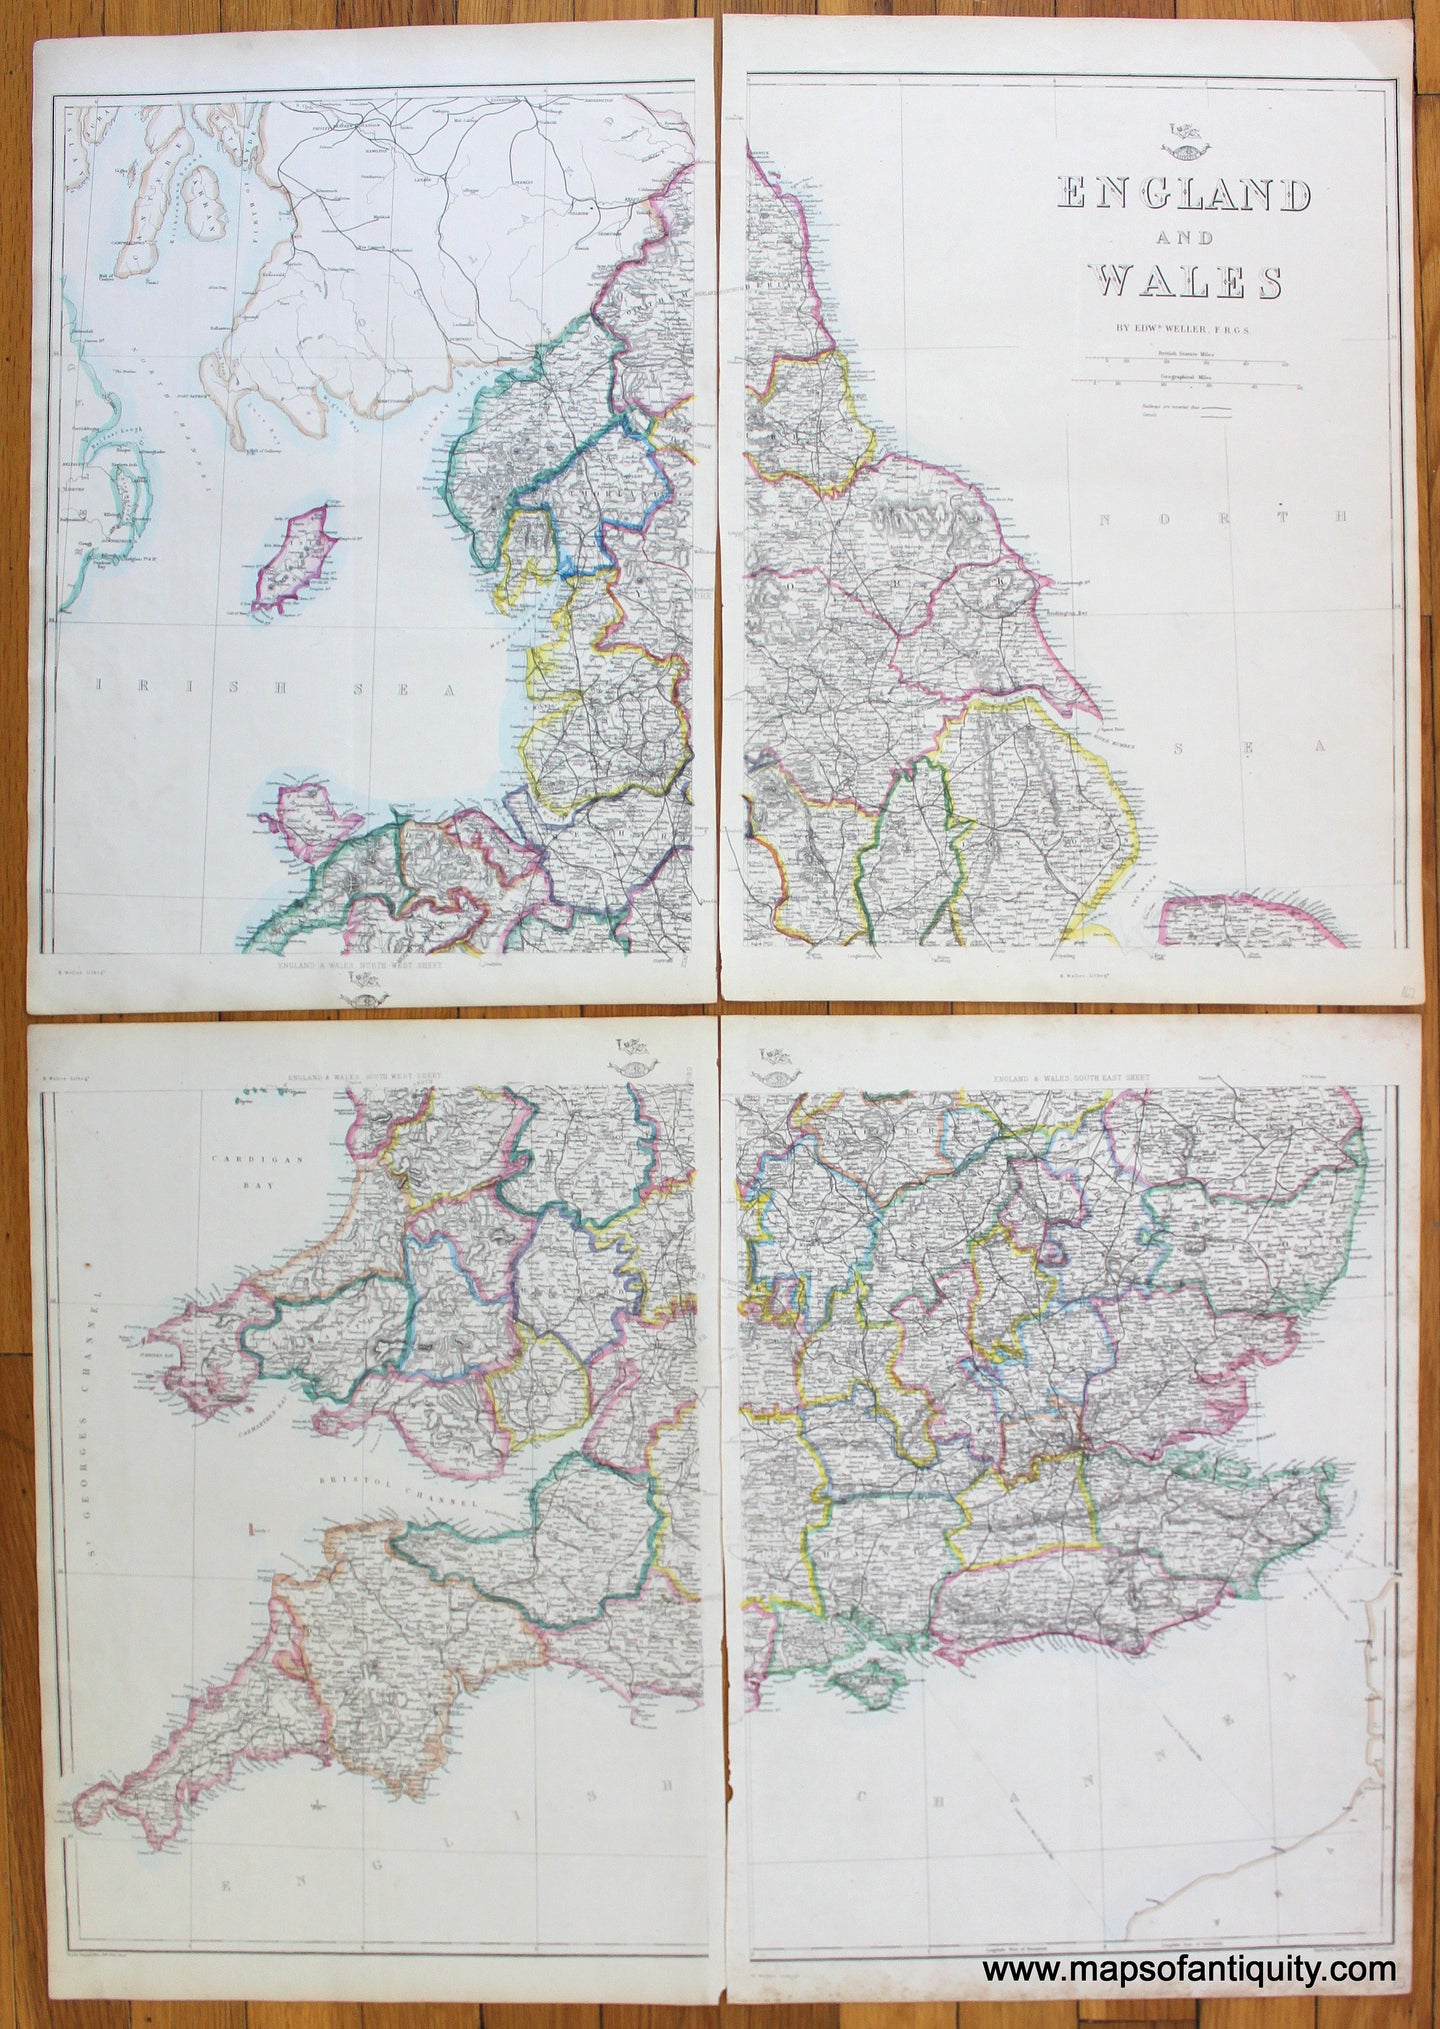 Antique-Hand-Colored-Map-1863-Weller/Weekly-Dispatch-Atlas-England-and-Wales-